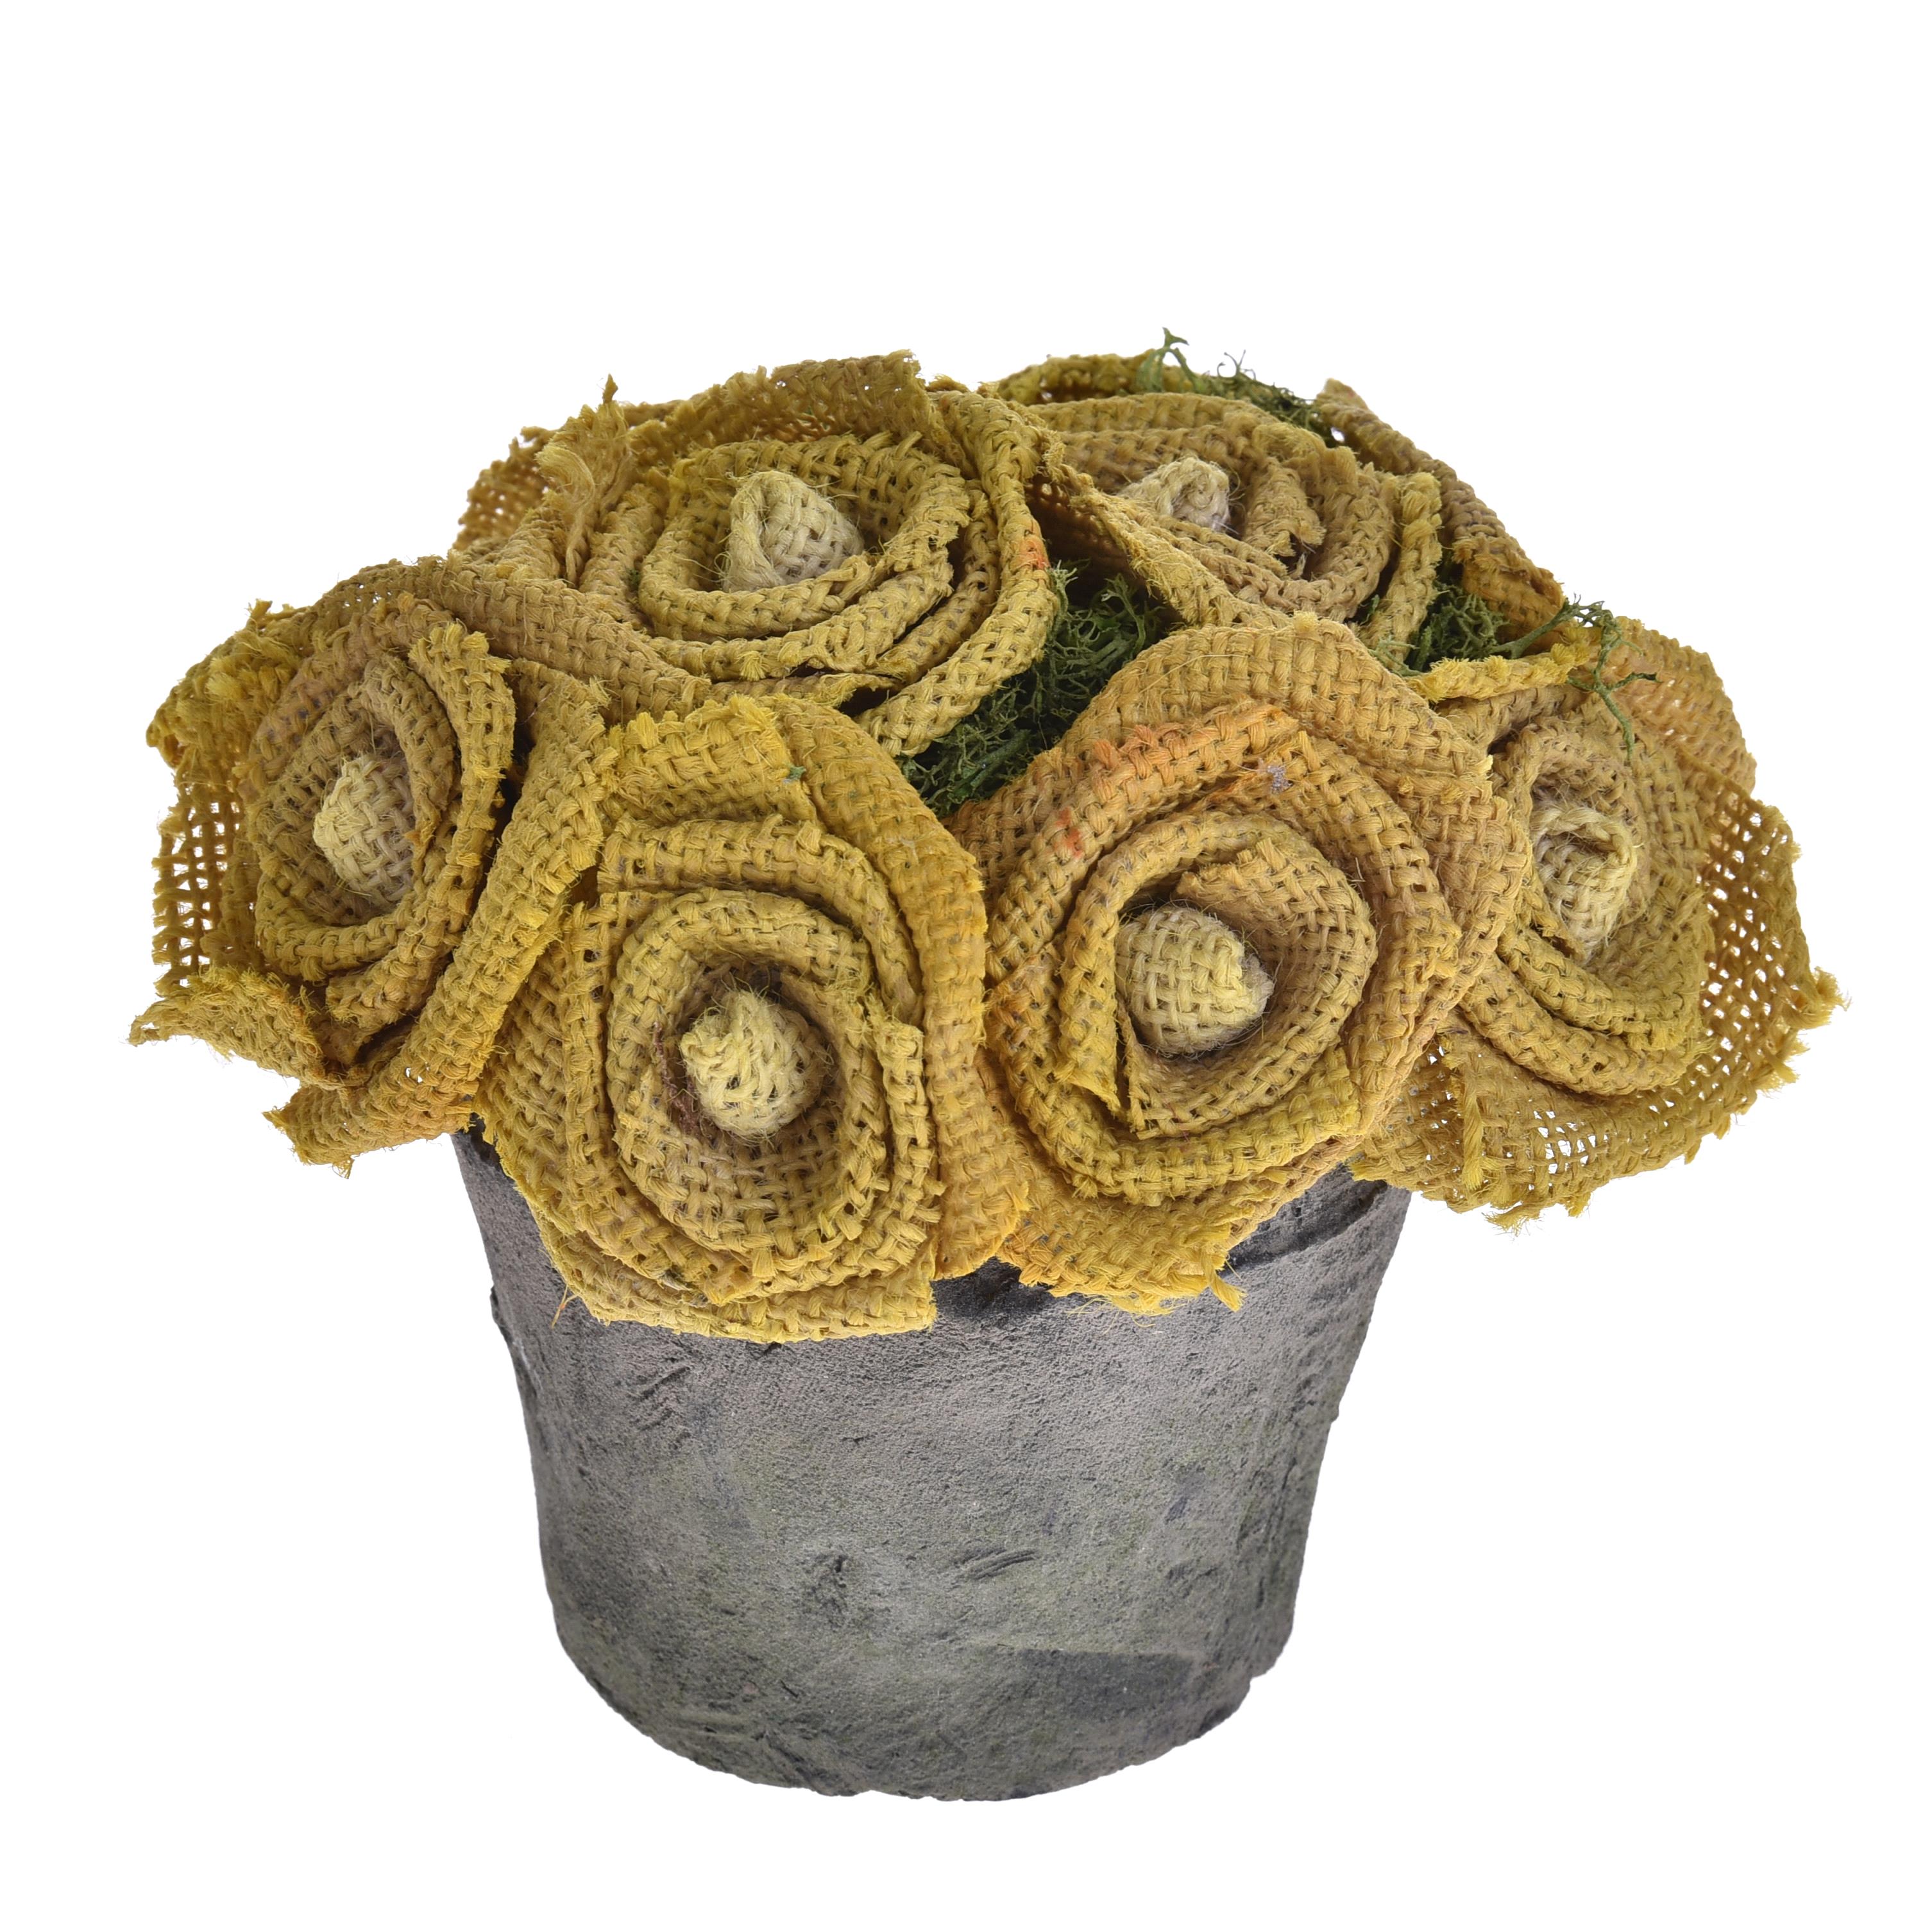 NATURAL PRODUCTS DRIED FLOWERS AND ERBS,VASETTO ROSE YUTA 7 FIORI D.15 CM